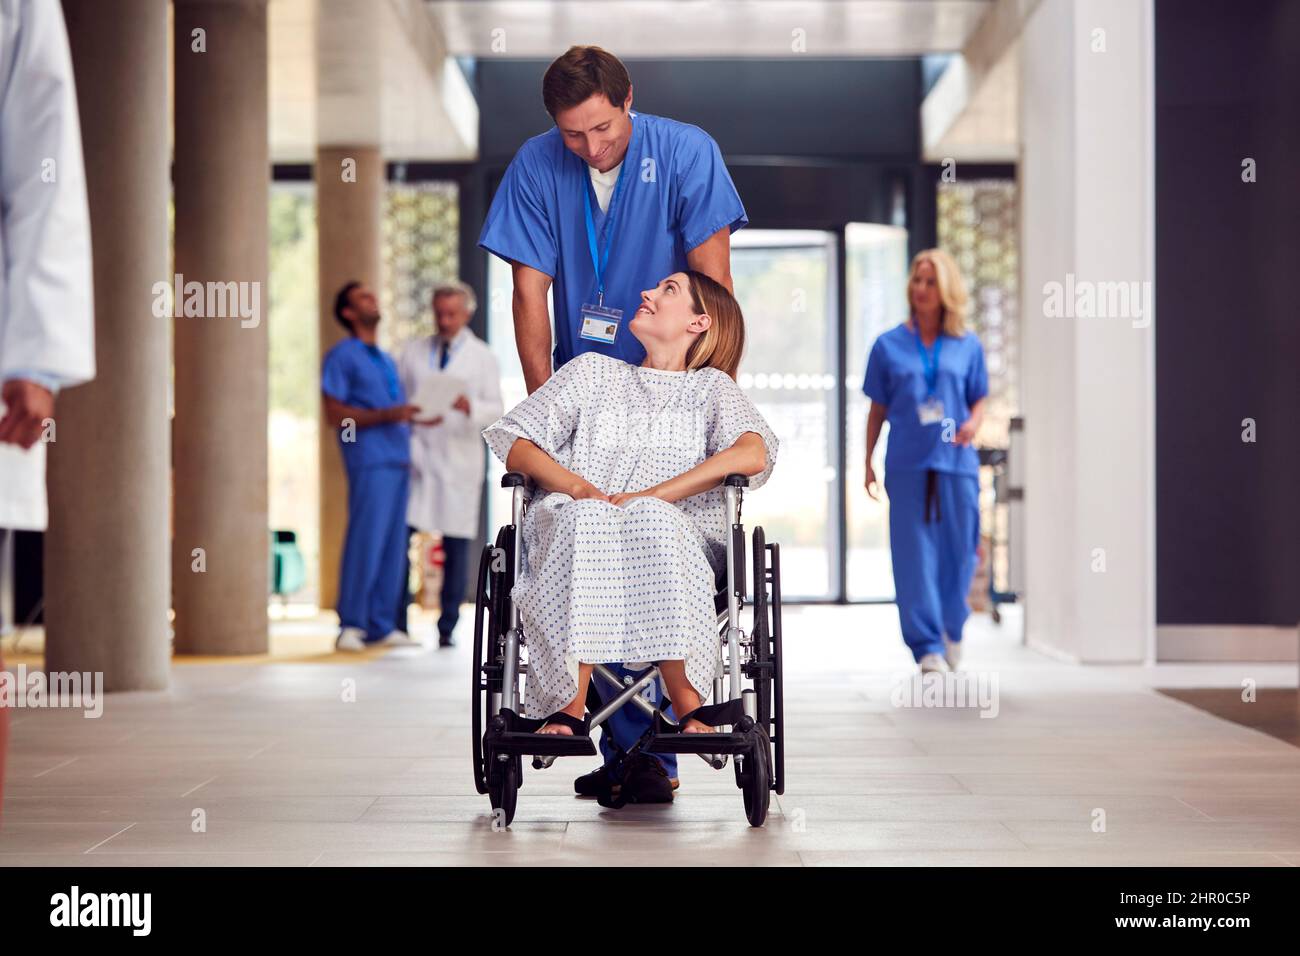 Male Nurse Wearing Scrubs Pushing Female Patient In Wheelchair Through Hospital Building Stock Photo